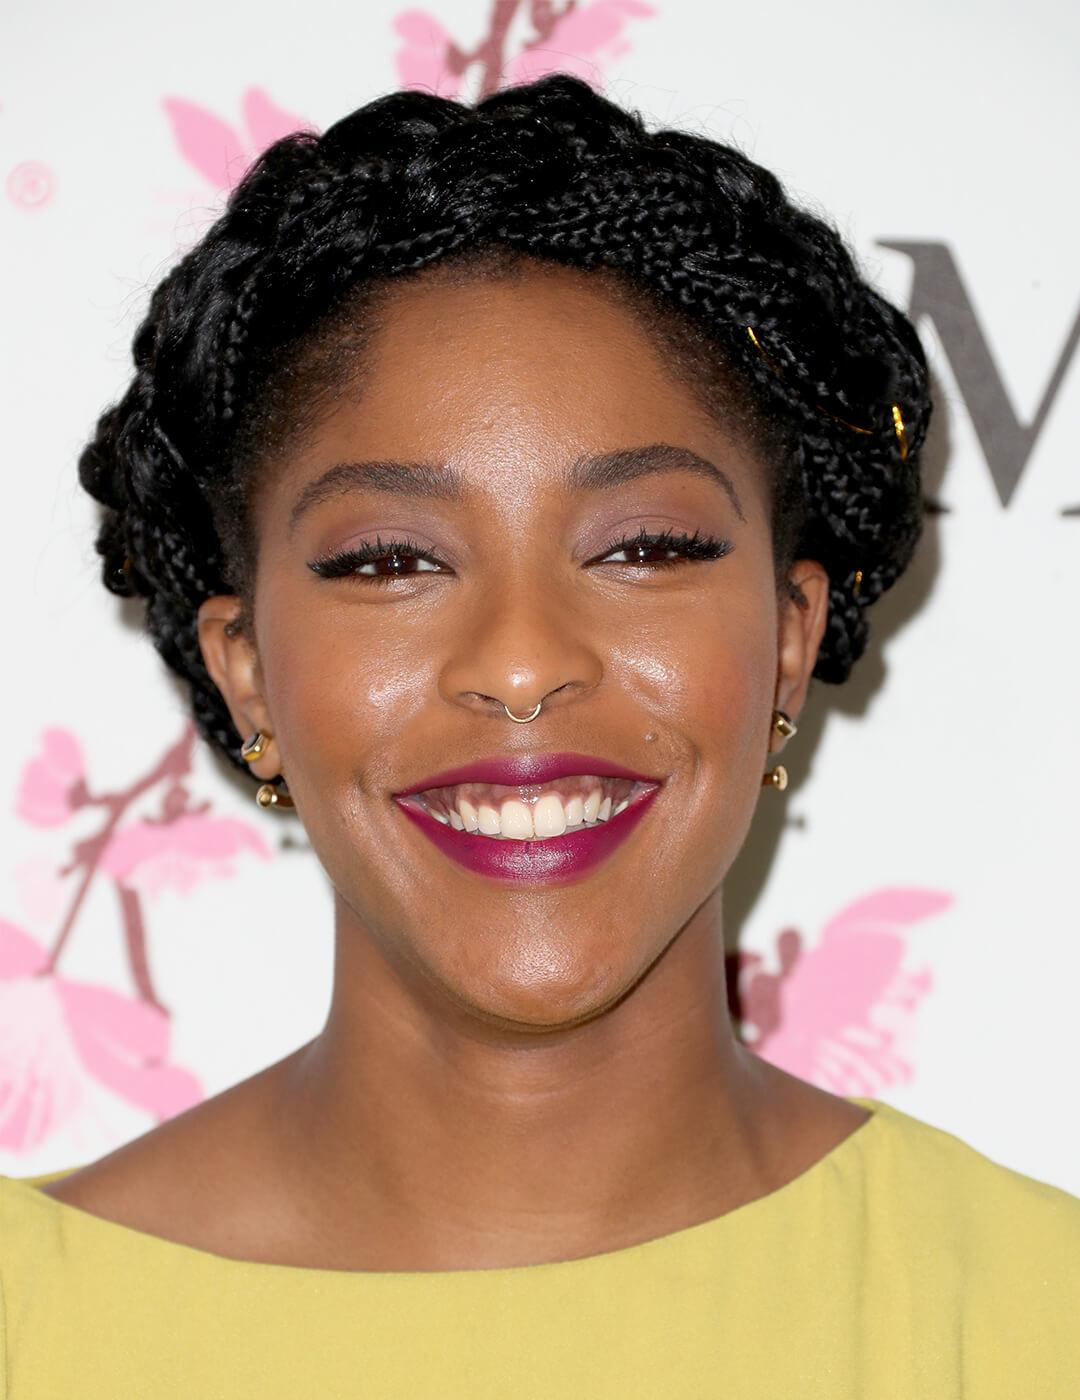 Smiling Jessica Williams rocking a yellow dress and halo braids hairstyle on the red carpet